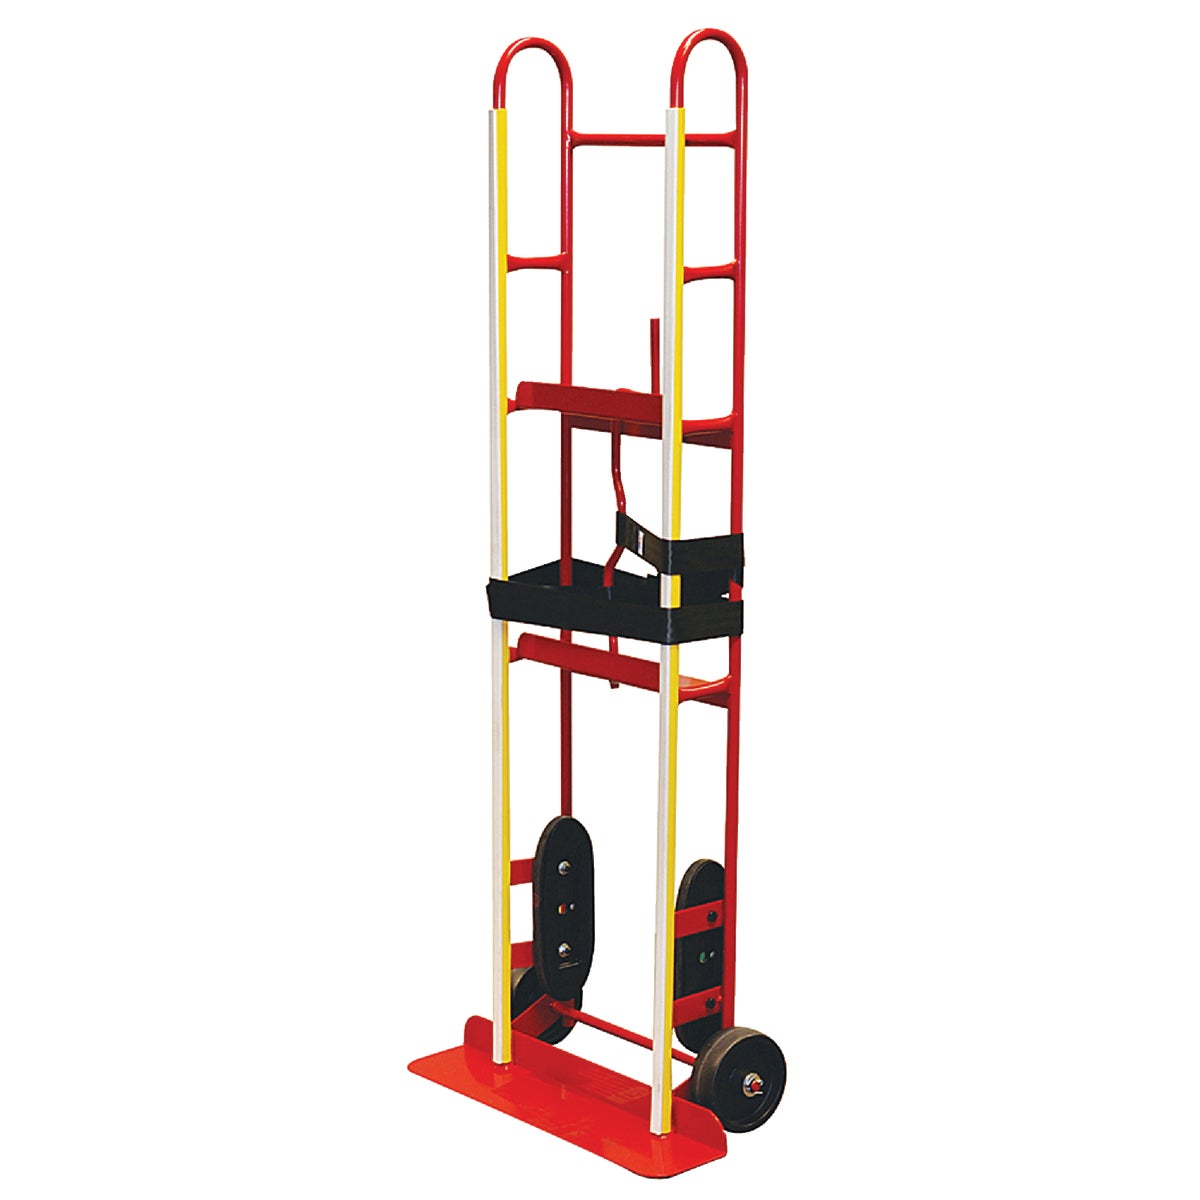 Item 709825, Hand truck made of 3/4 In. tubular steel construction.